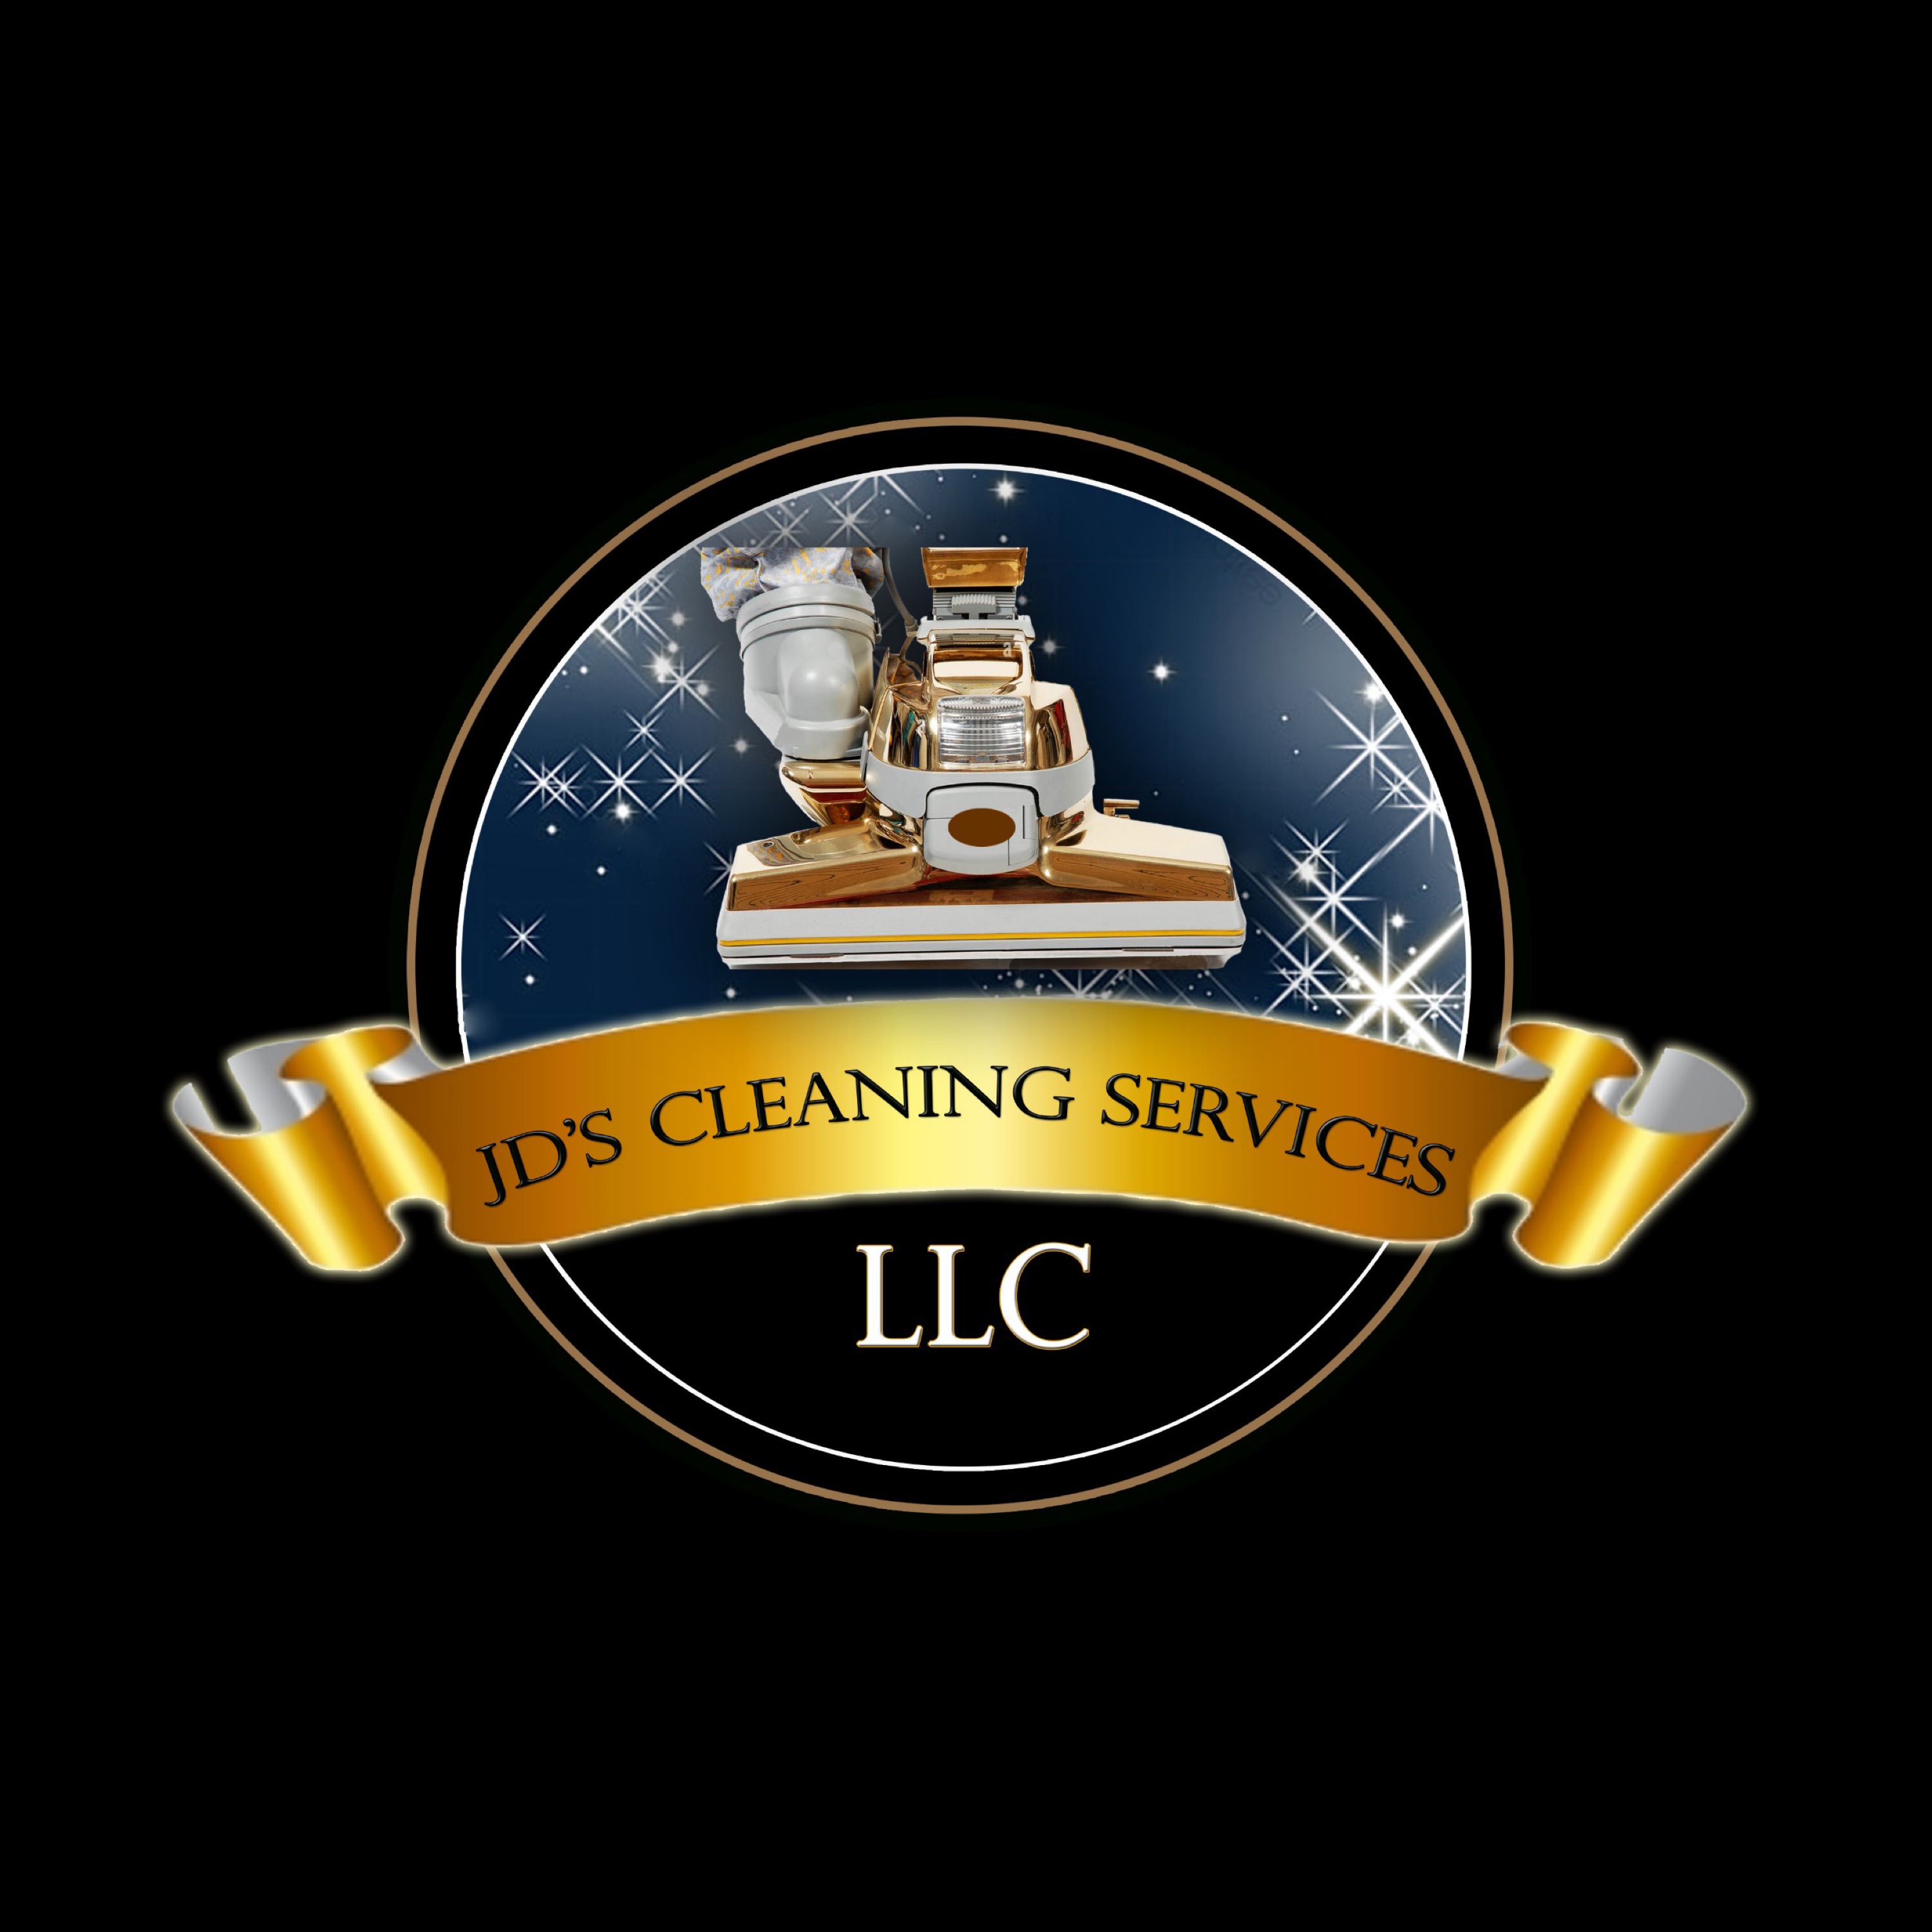 JD's Cleaning Services, LLC Logo